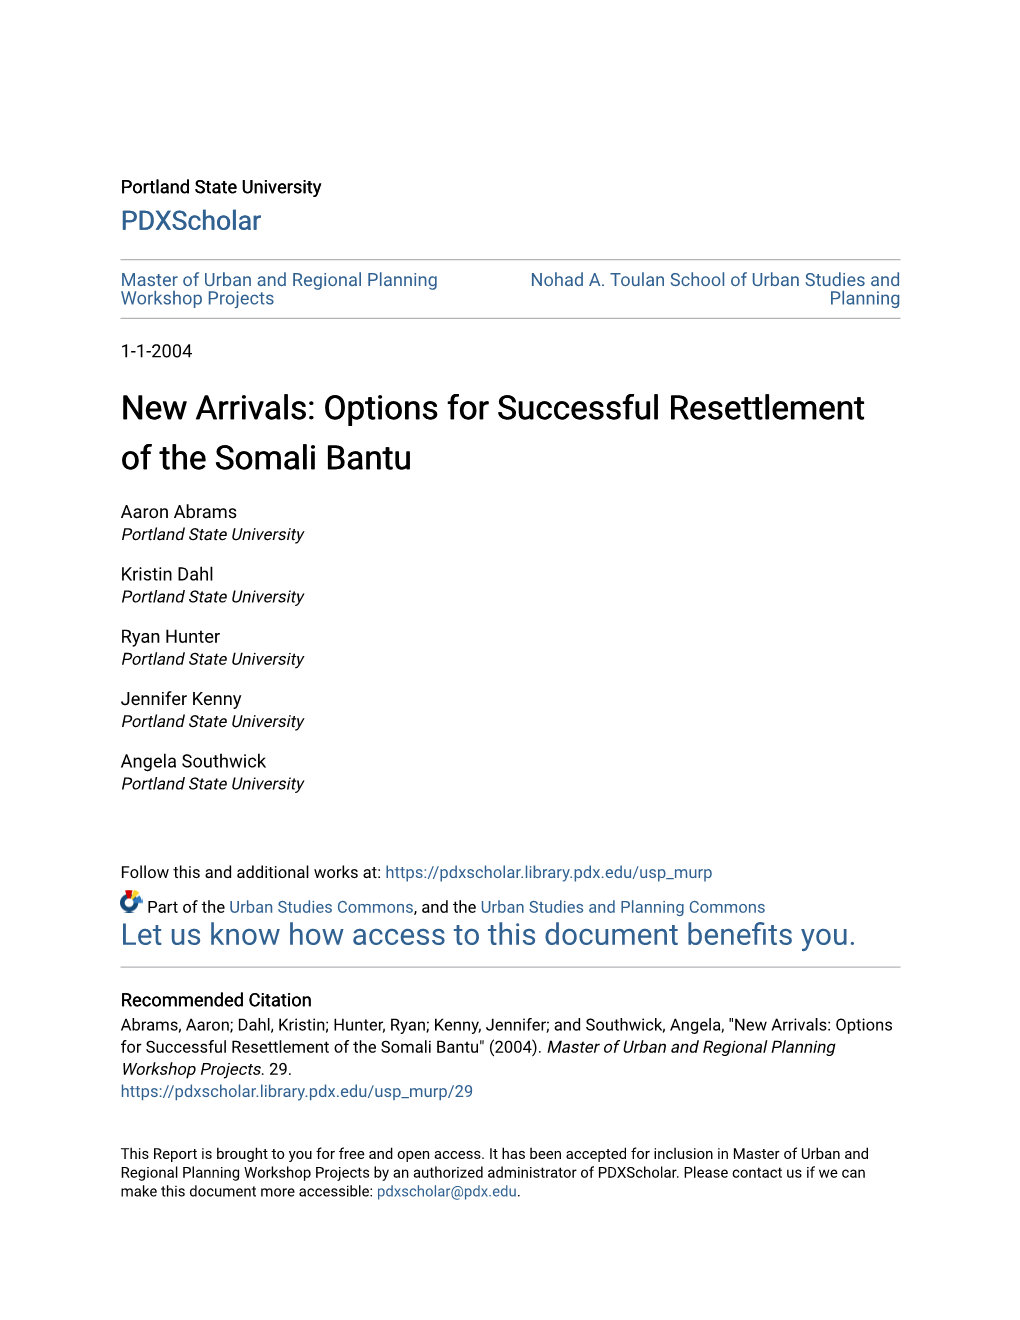 Options for Successful Resettlement of the Somali Bantu